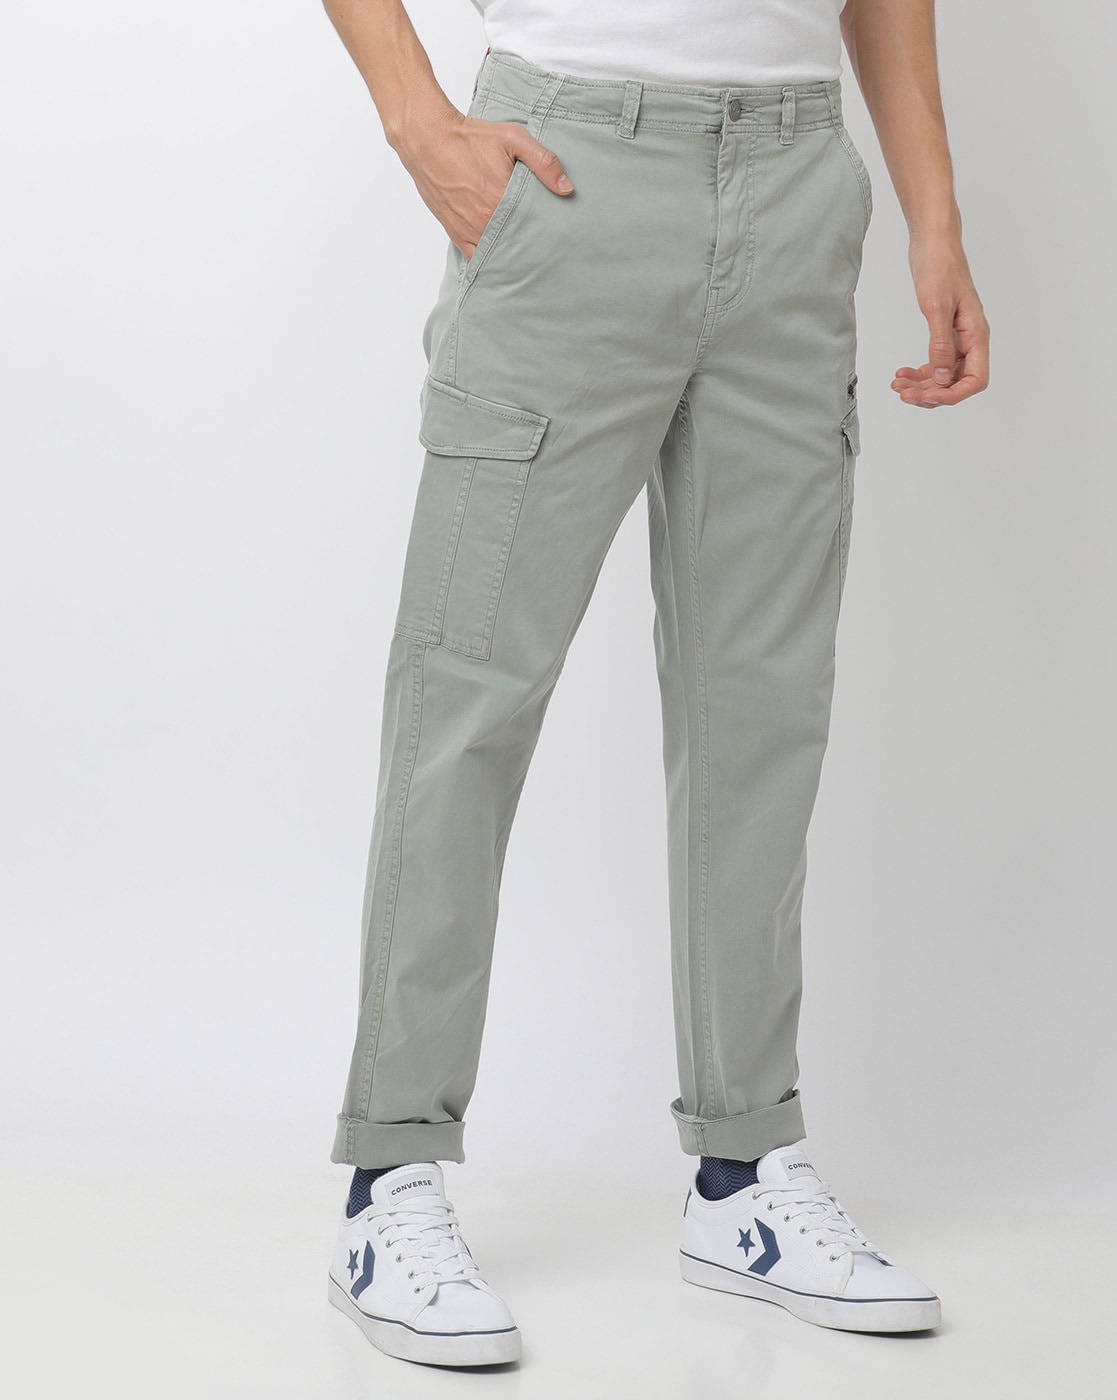 Buy Celio Solid Brown Cotton Cargo Pant at Amazon.in